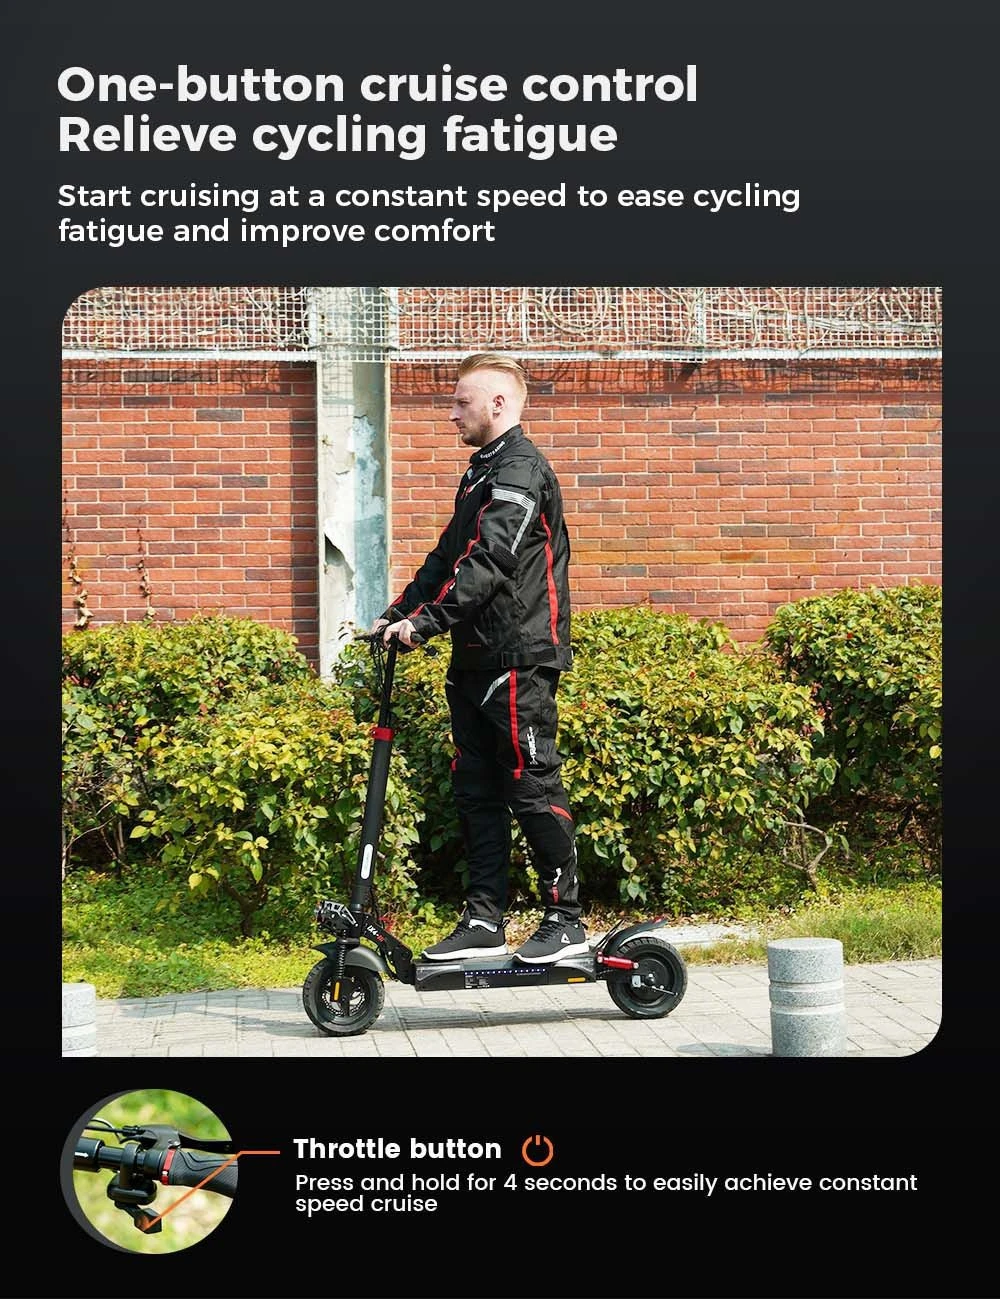 iScooter IX4 Electric Scooter 10'' Honeycomb Tires 800W Motor 45km/h Max Speed 48V 15Ah Battery 40-45km Range App Control